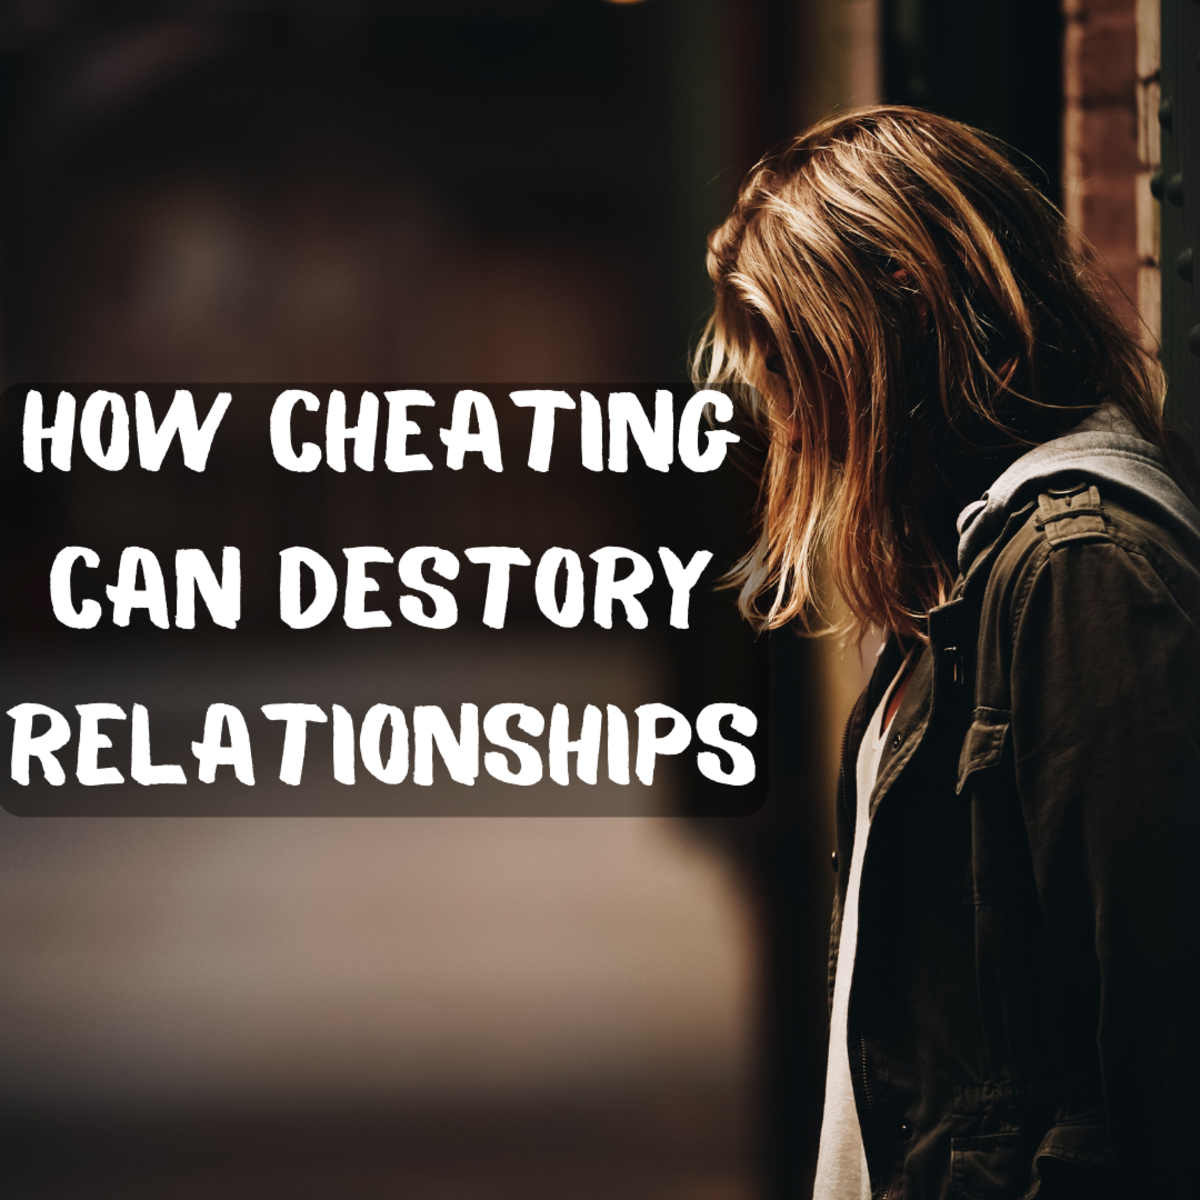 How Cheating Wrecks a Marriage and Other Relationships